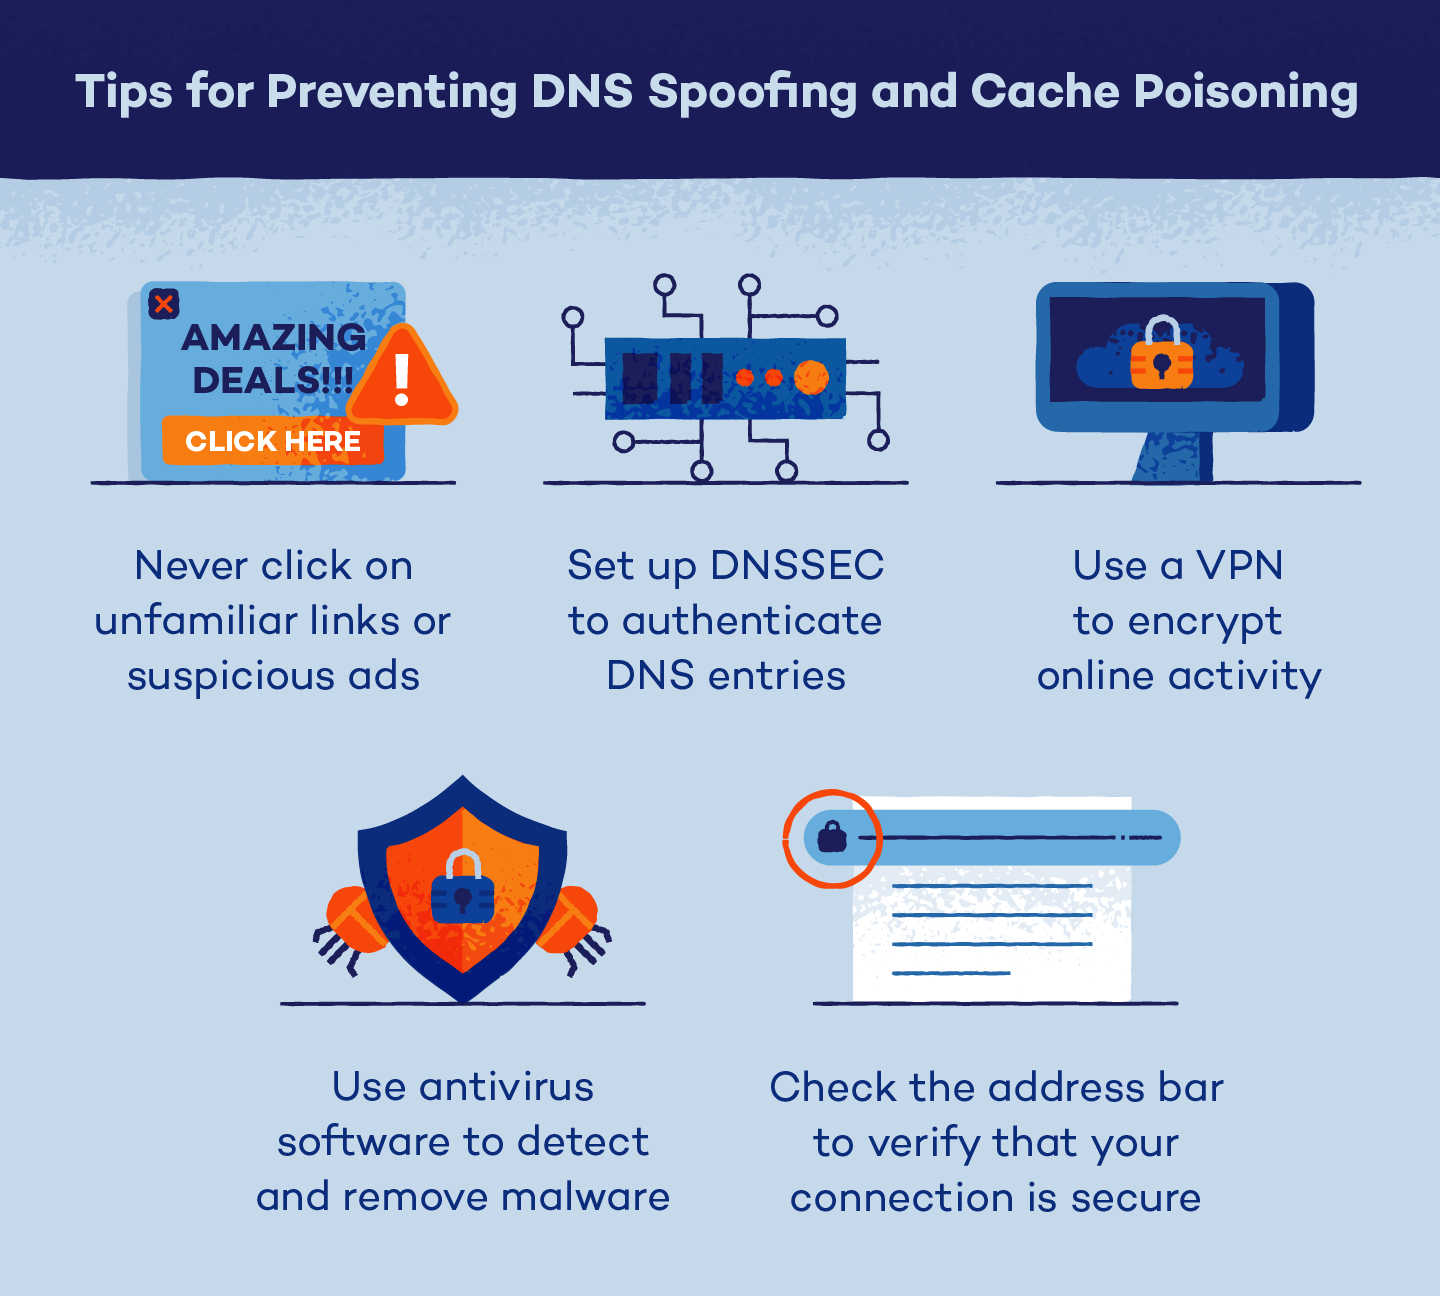 Illustration highlighting tips for preventing DNS spoofing and cache poisoning